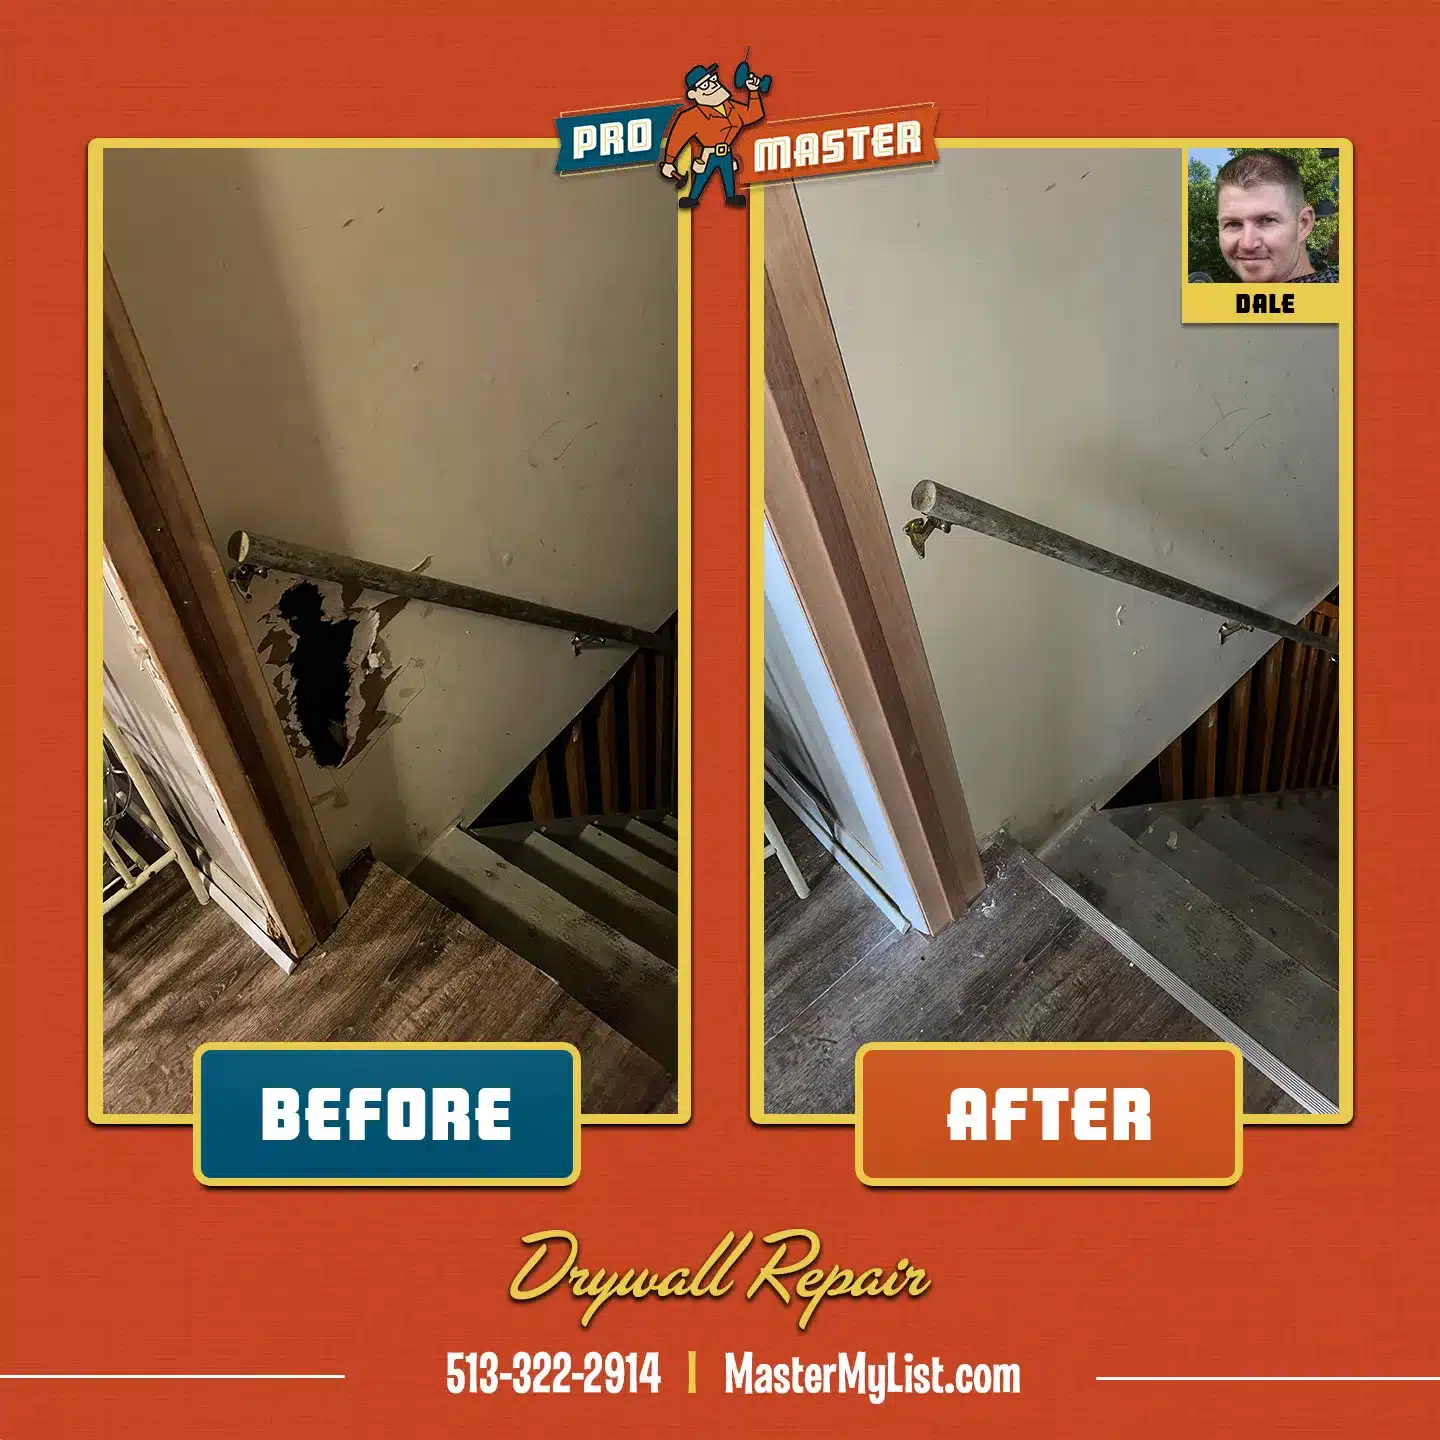 Before and after image of drywall repair completed by ProMaster in Cincinnati, OH